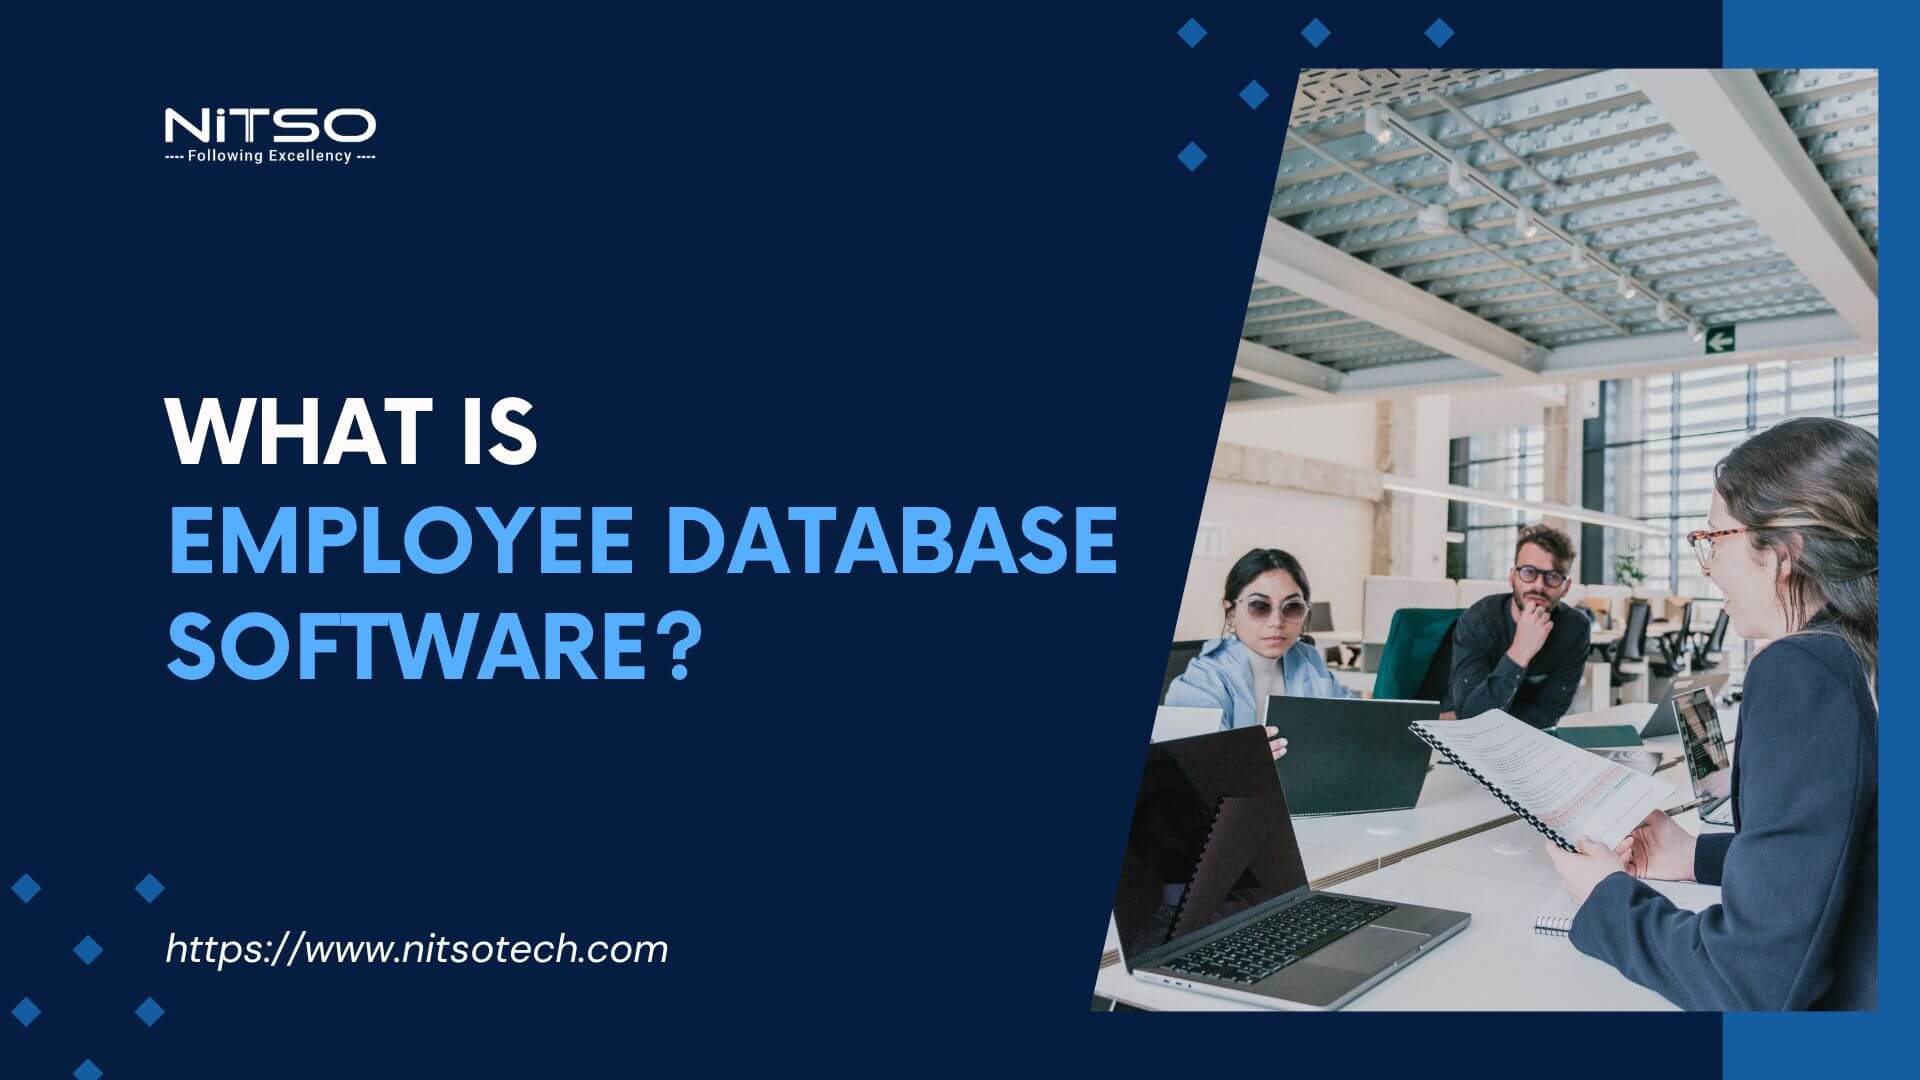 What is Employee Database Software?